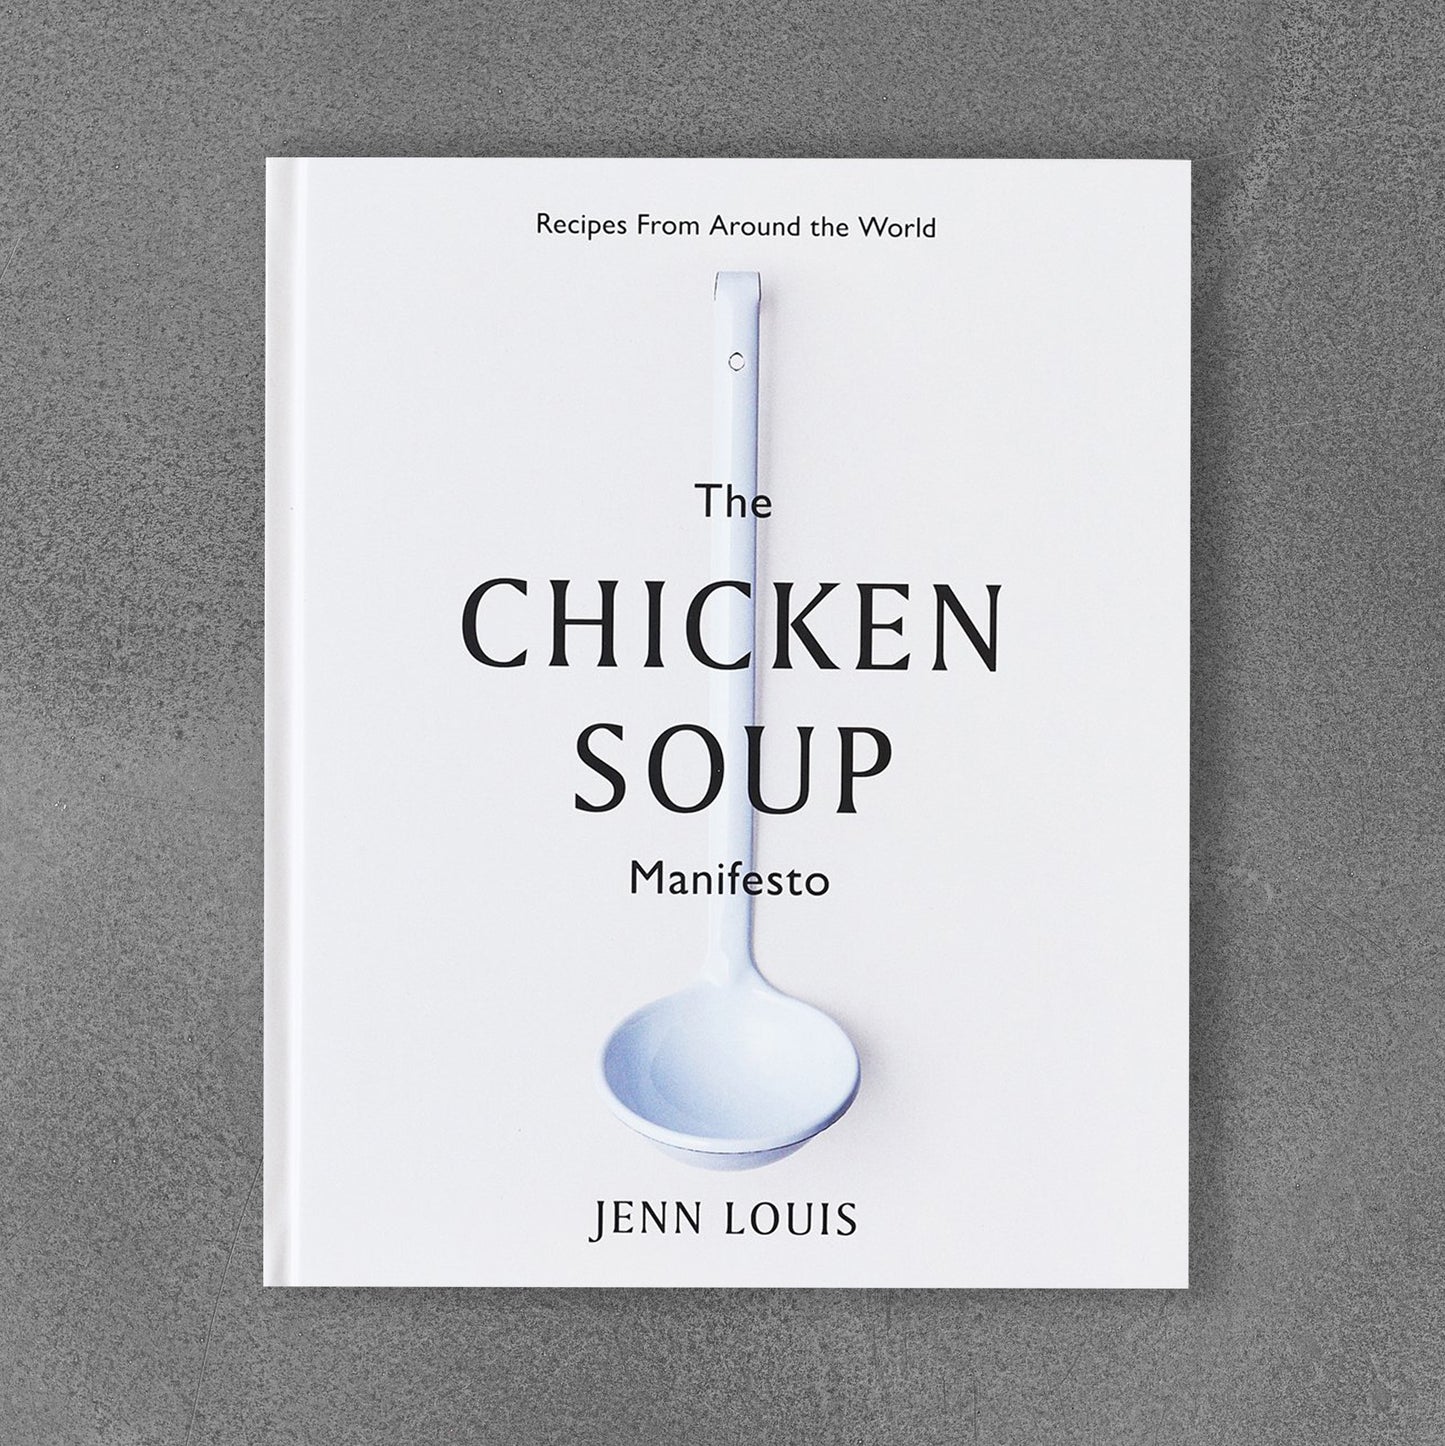 The Chicken Soup Manifesto Recipes from around the world